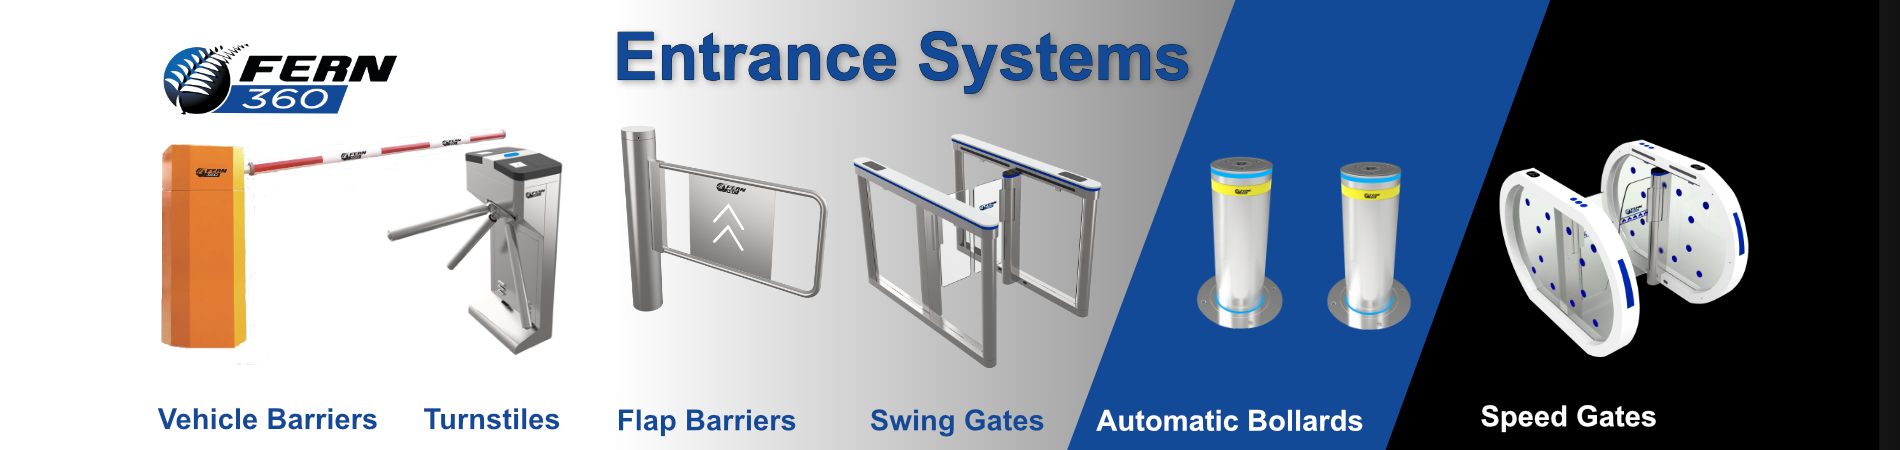 Fern360 entrance systems and solutions security entrance control banner